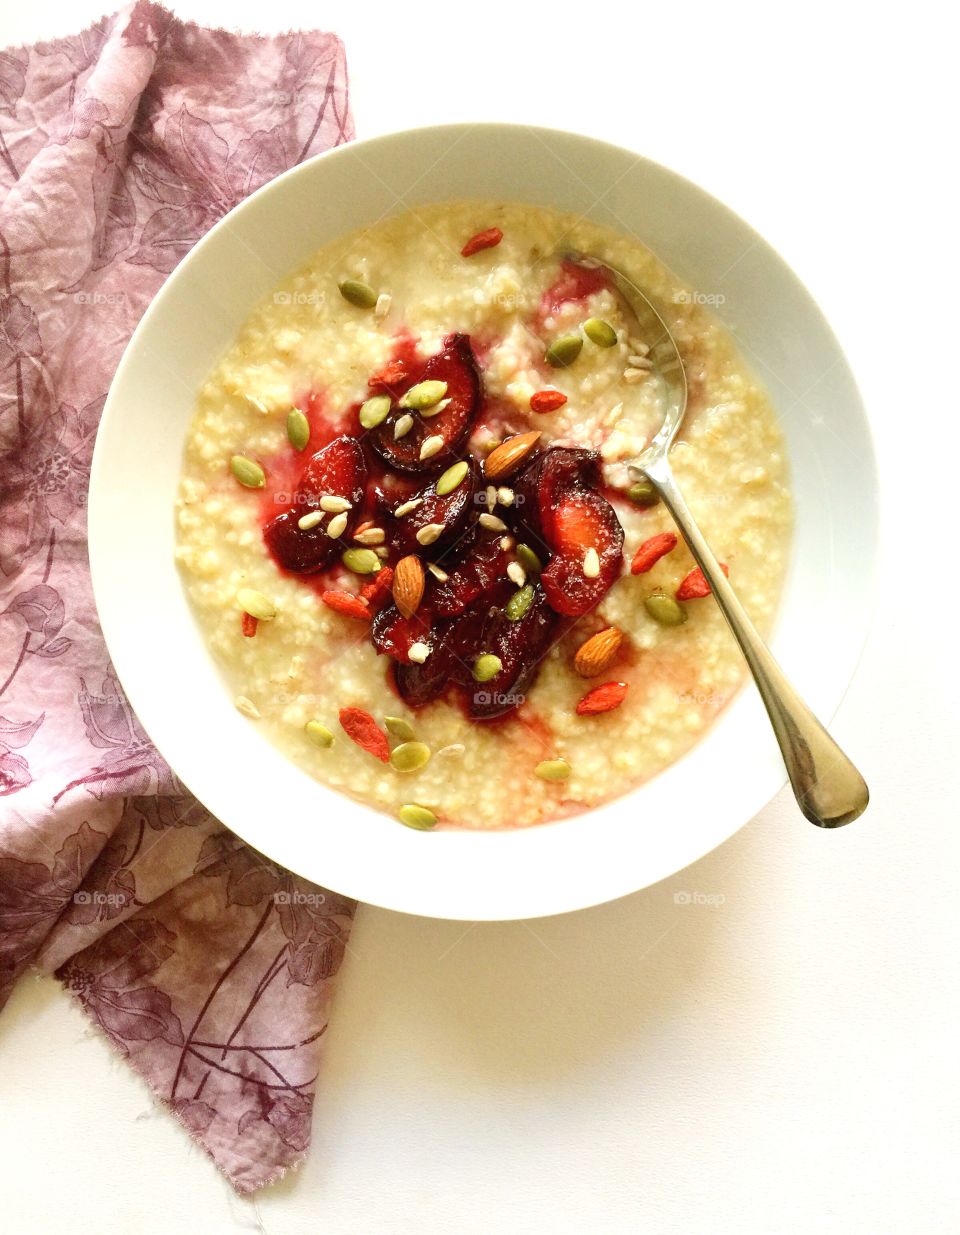 Oats with stewed plums and seeds